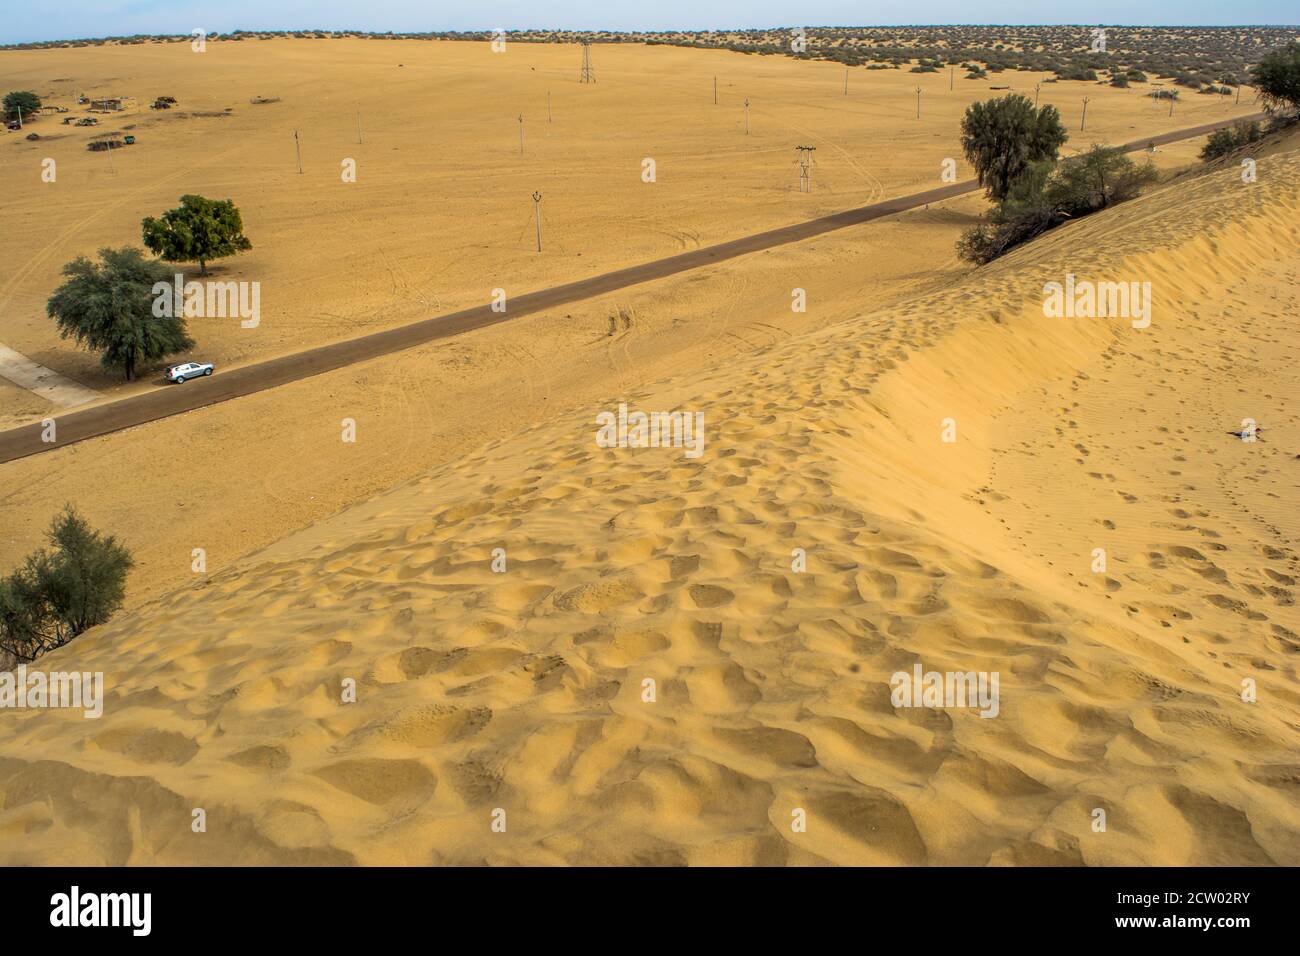 Highway, path, road in Desert of Rajasthan, India, Road passing through a landscape, Jaisalmer, Rajasthan Stock Photo